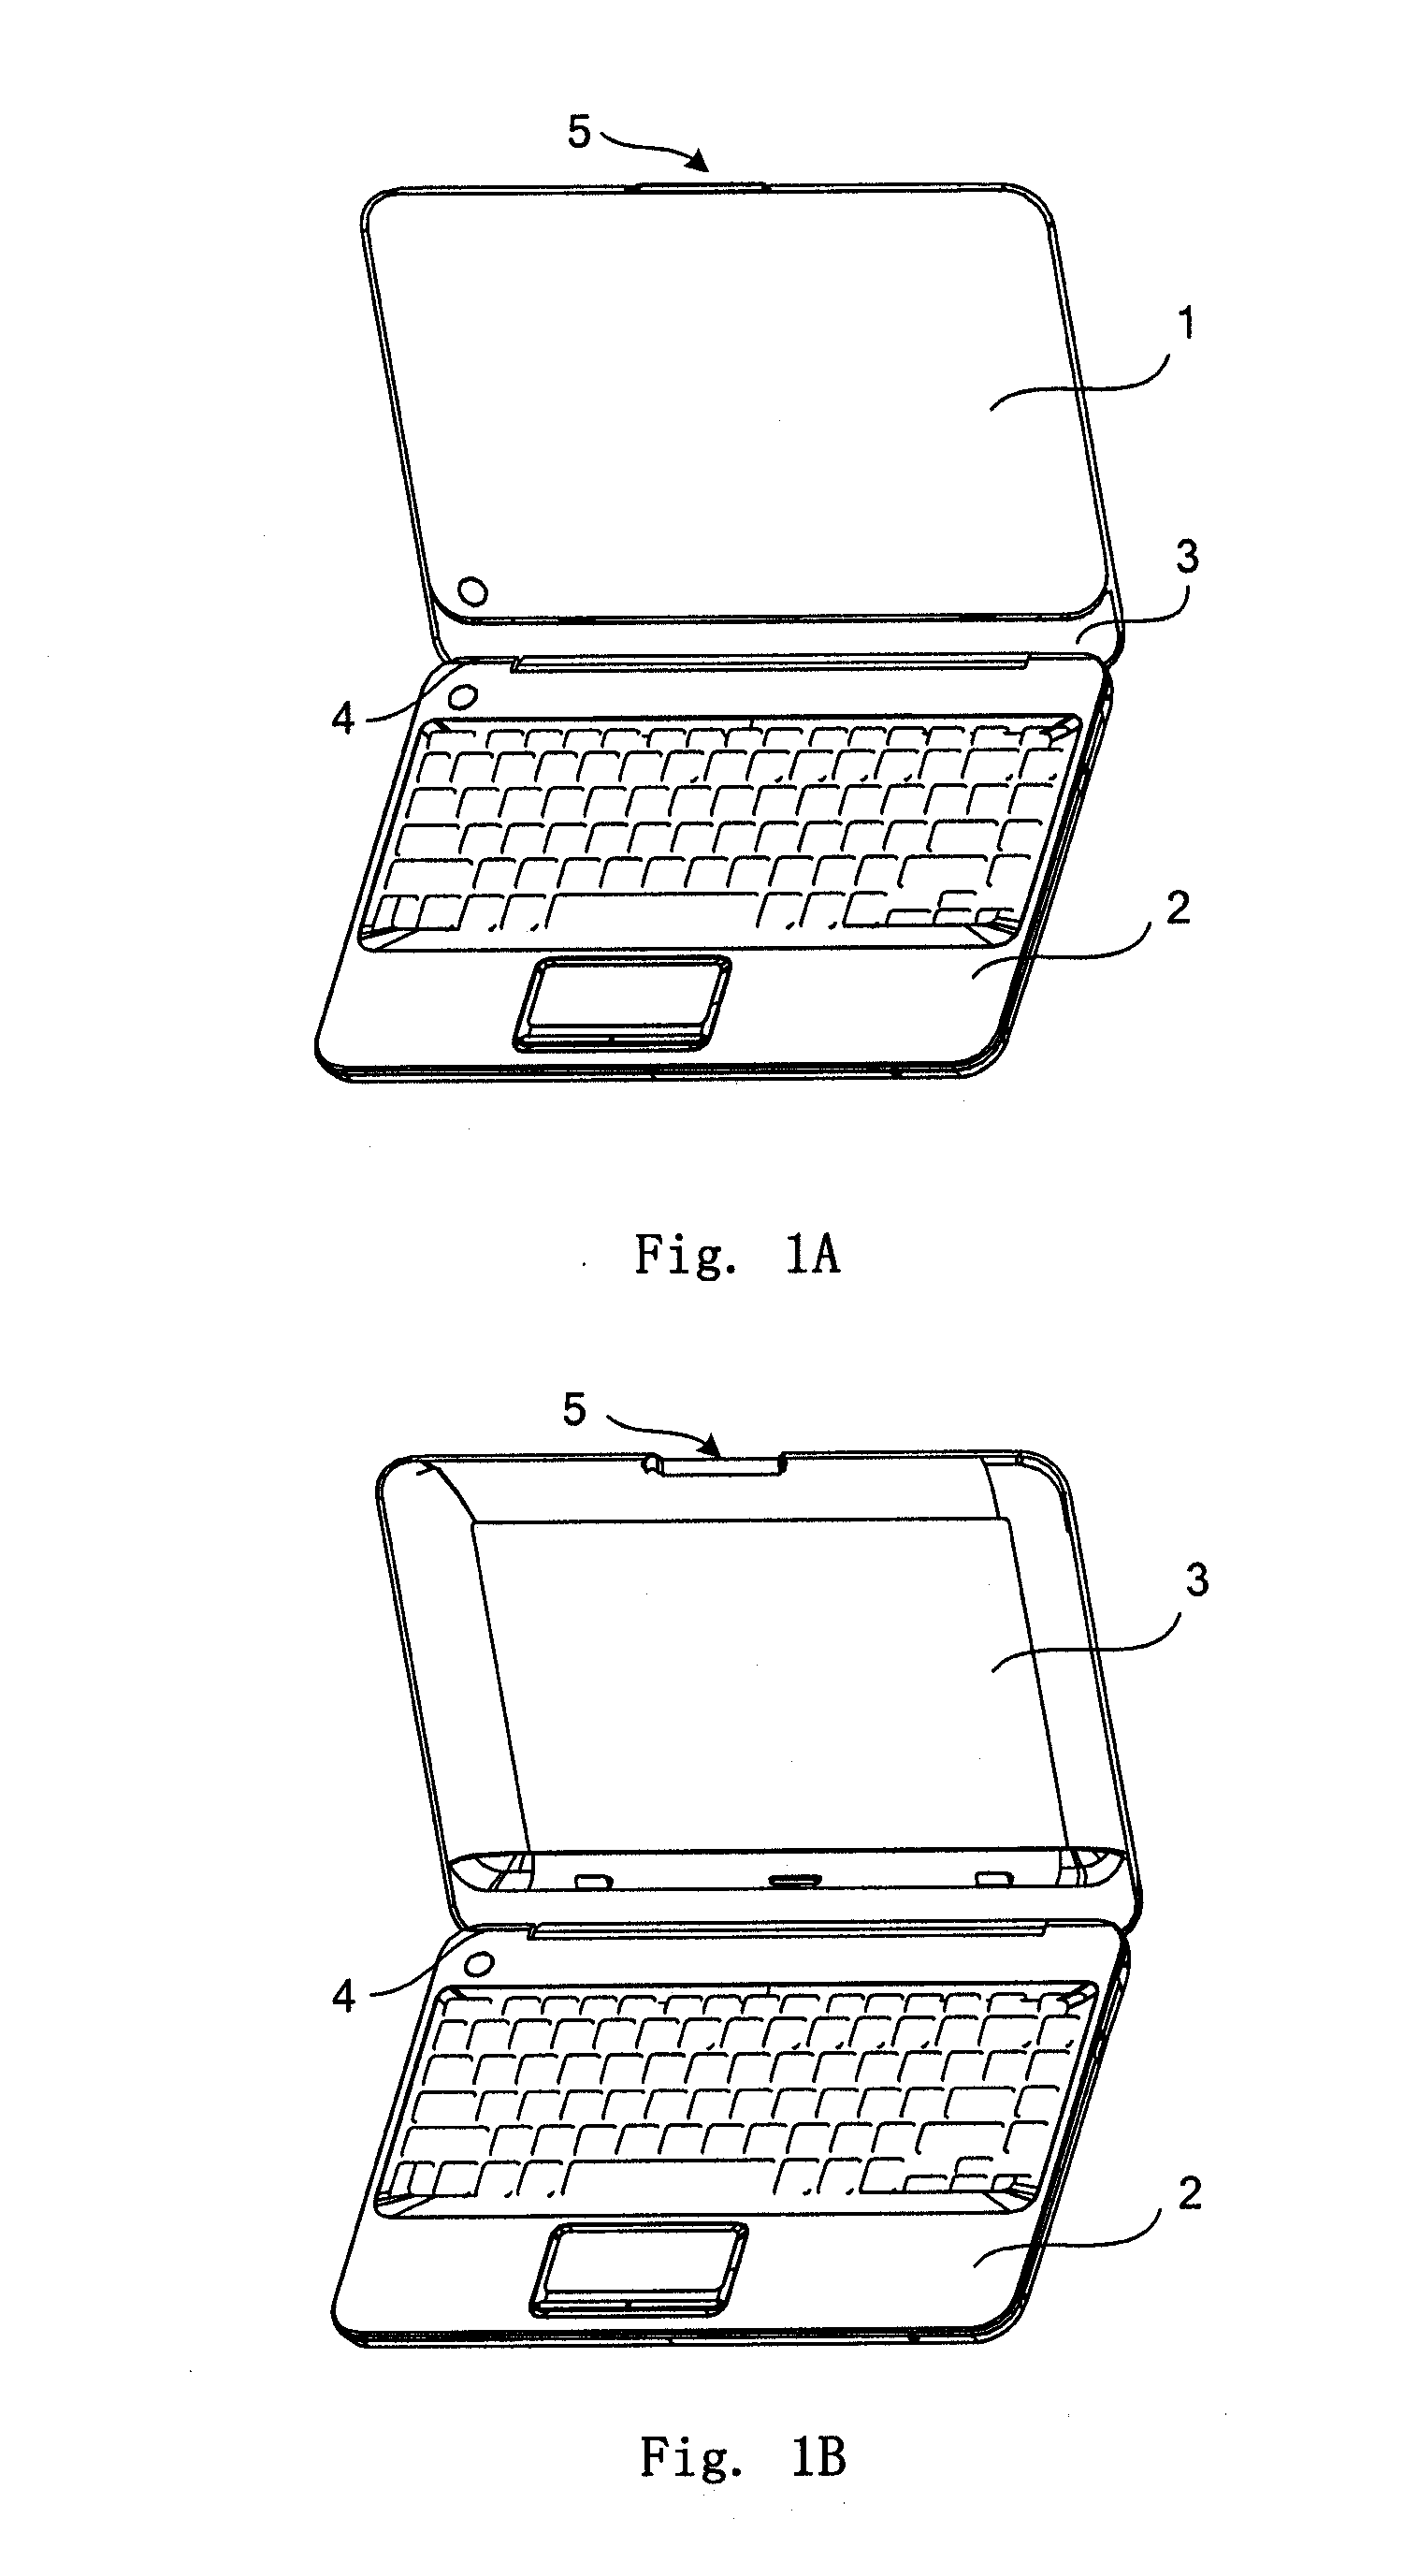 Removable portable computer device